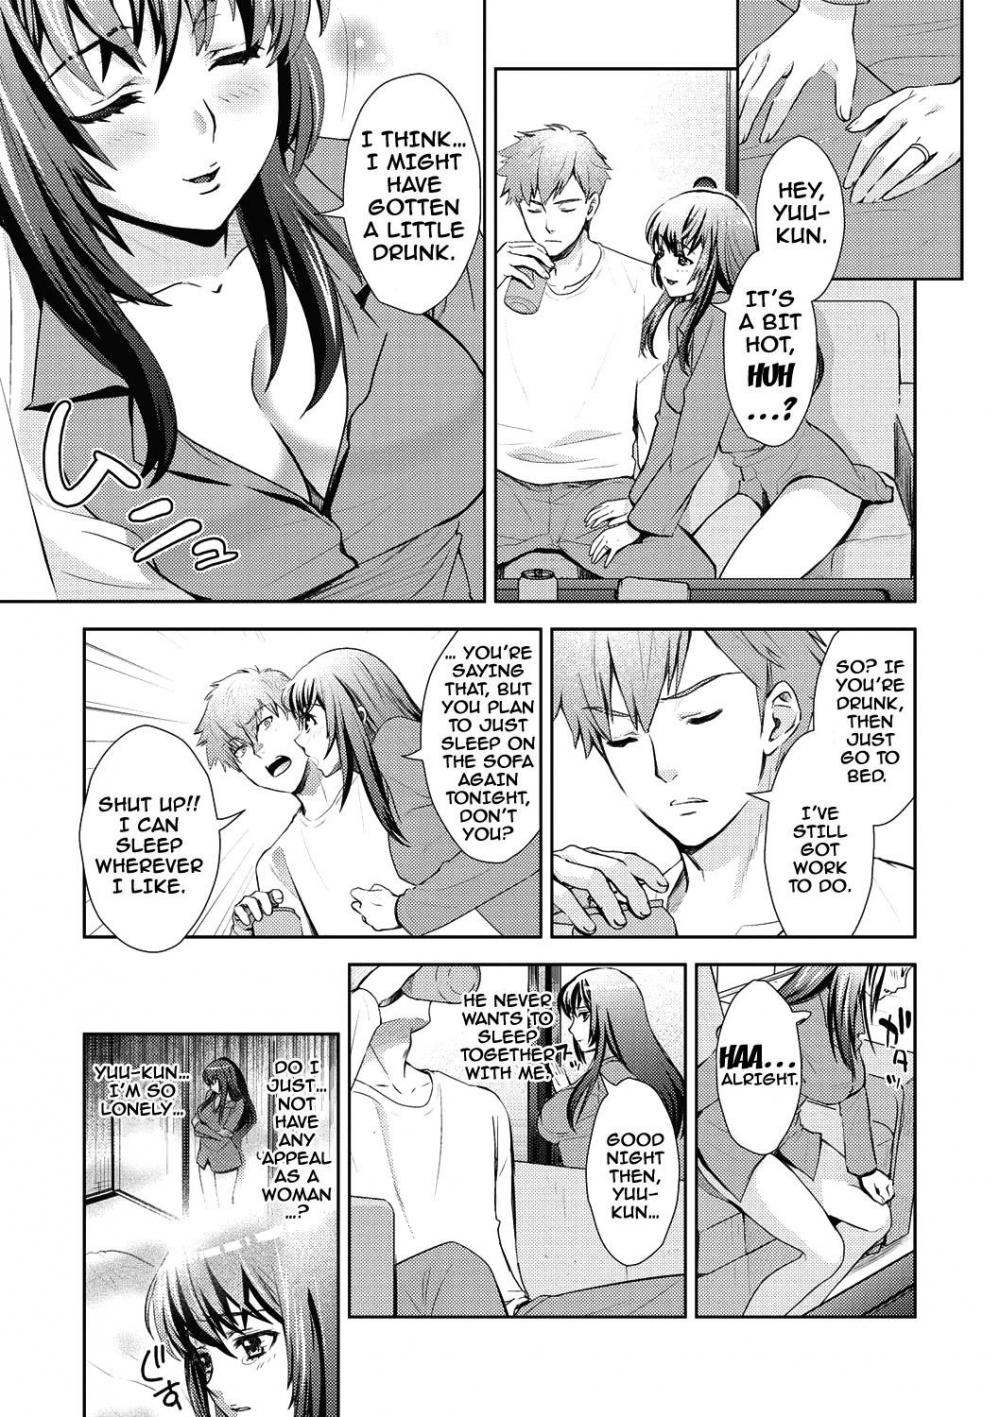 Hentai Manga Comic-From Now On She'll Be Doing NTR-Chapter 11-3